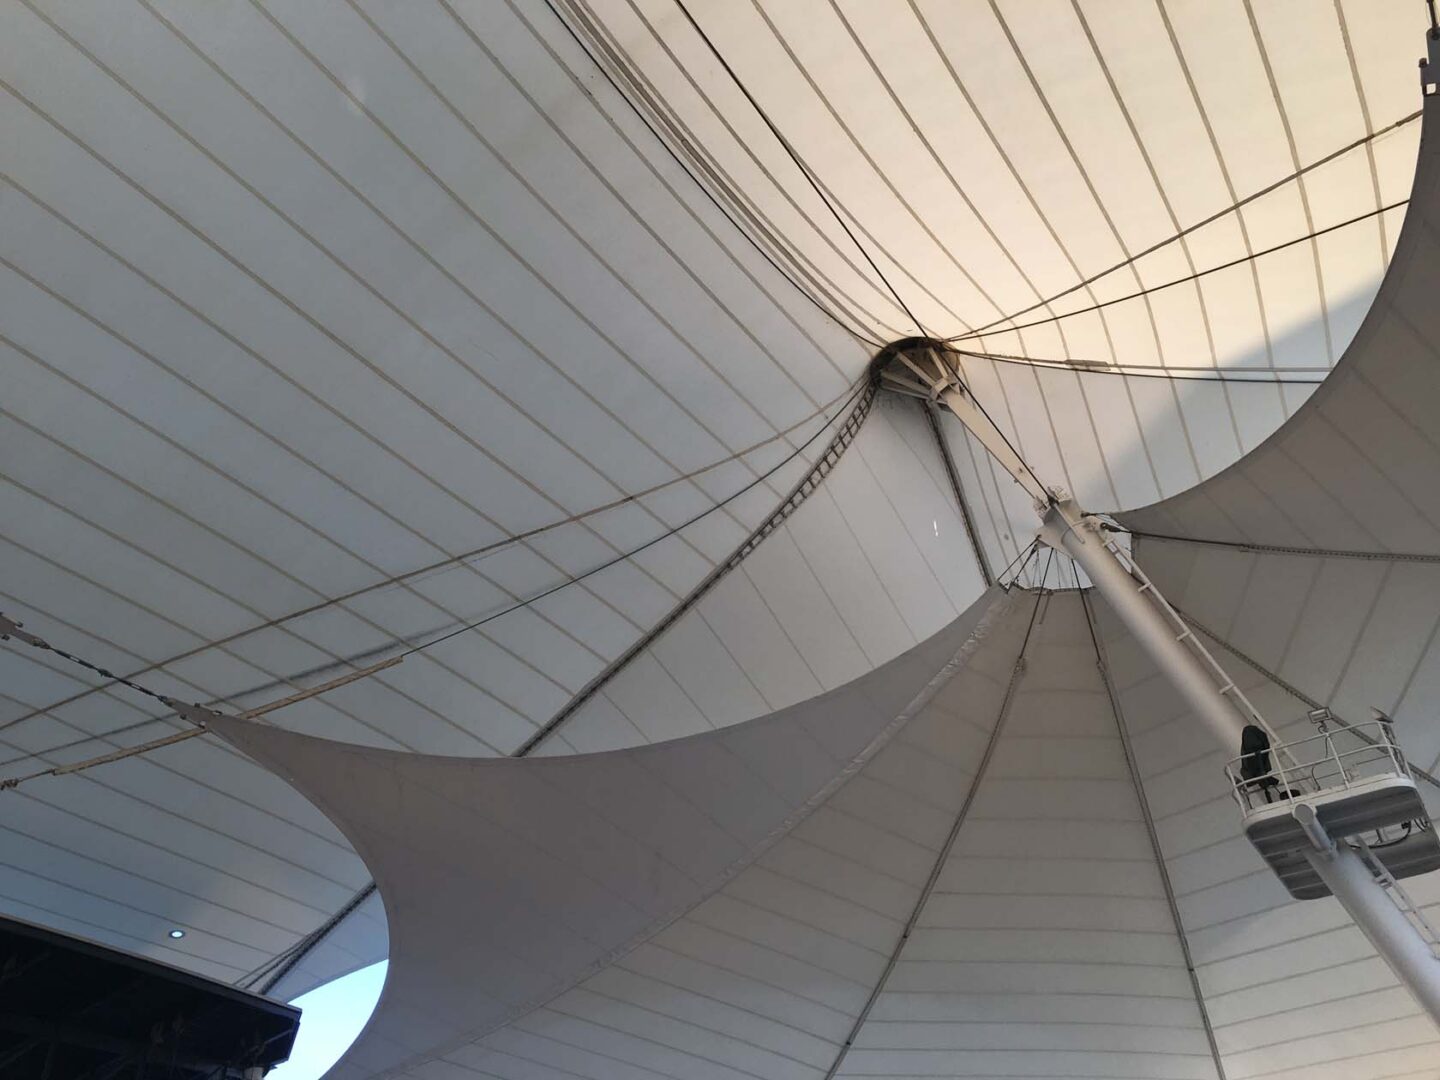 Close-up of tension fabric roof